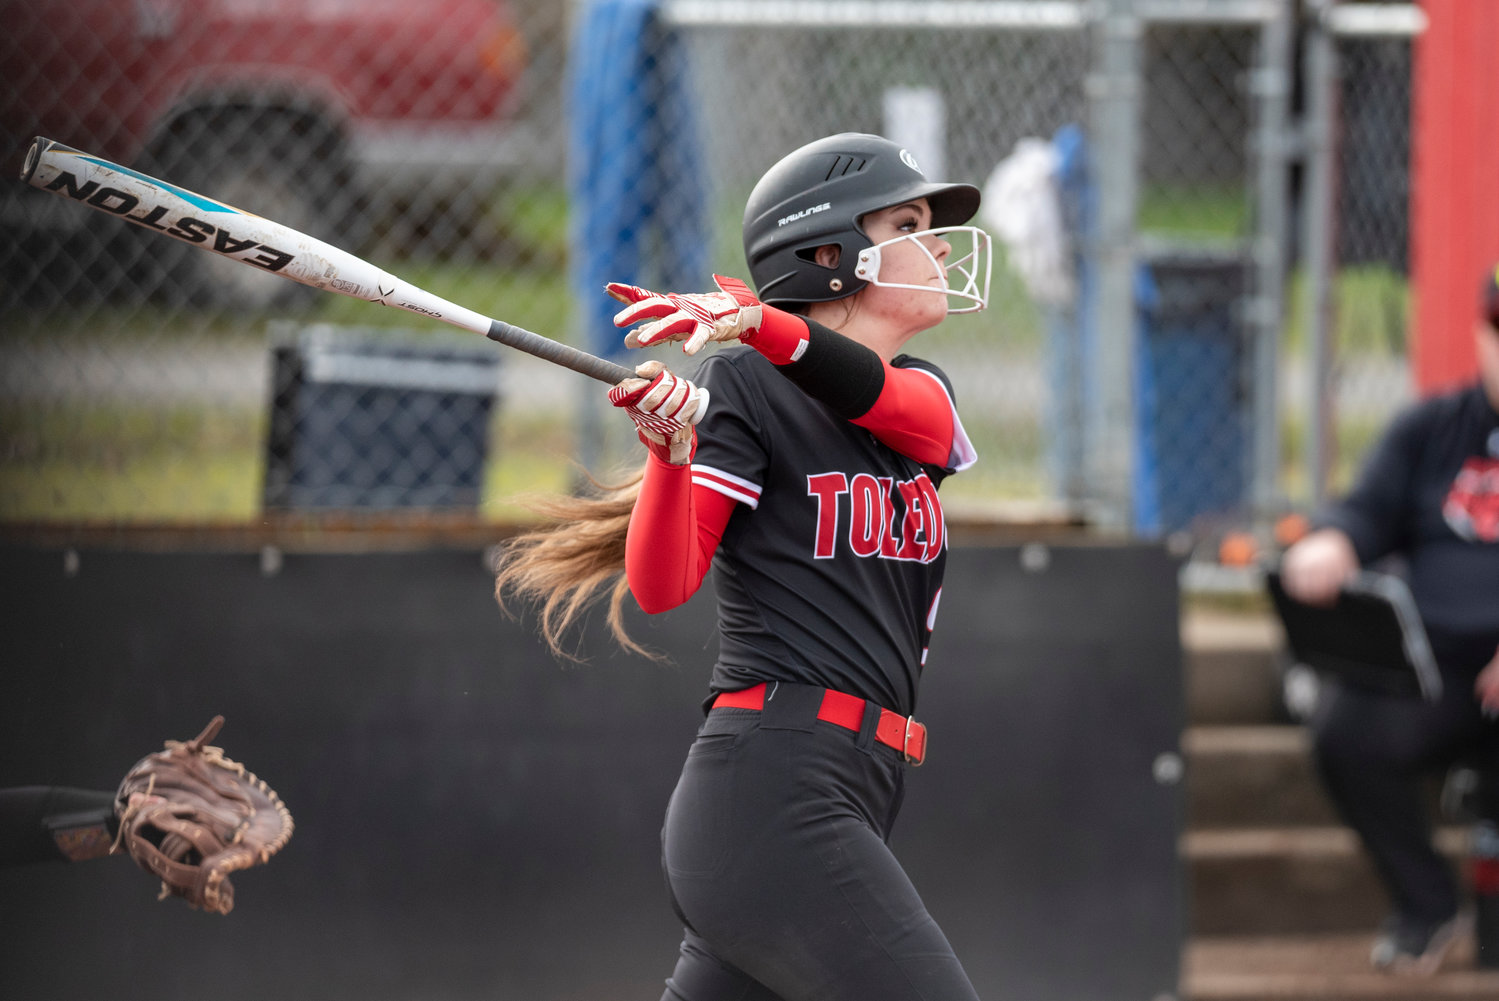 Tenino's Averie Robbins cracks a home run against Tenino on the road on March 16.